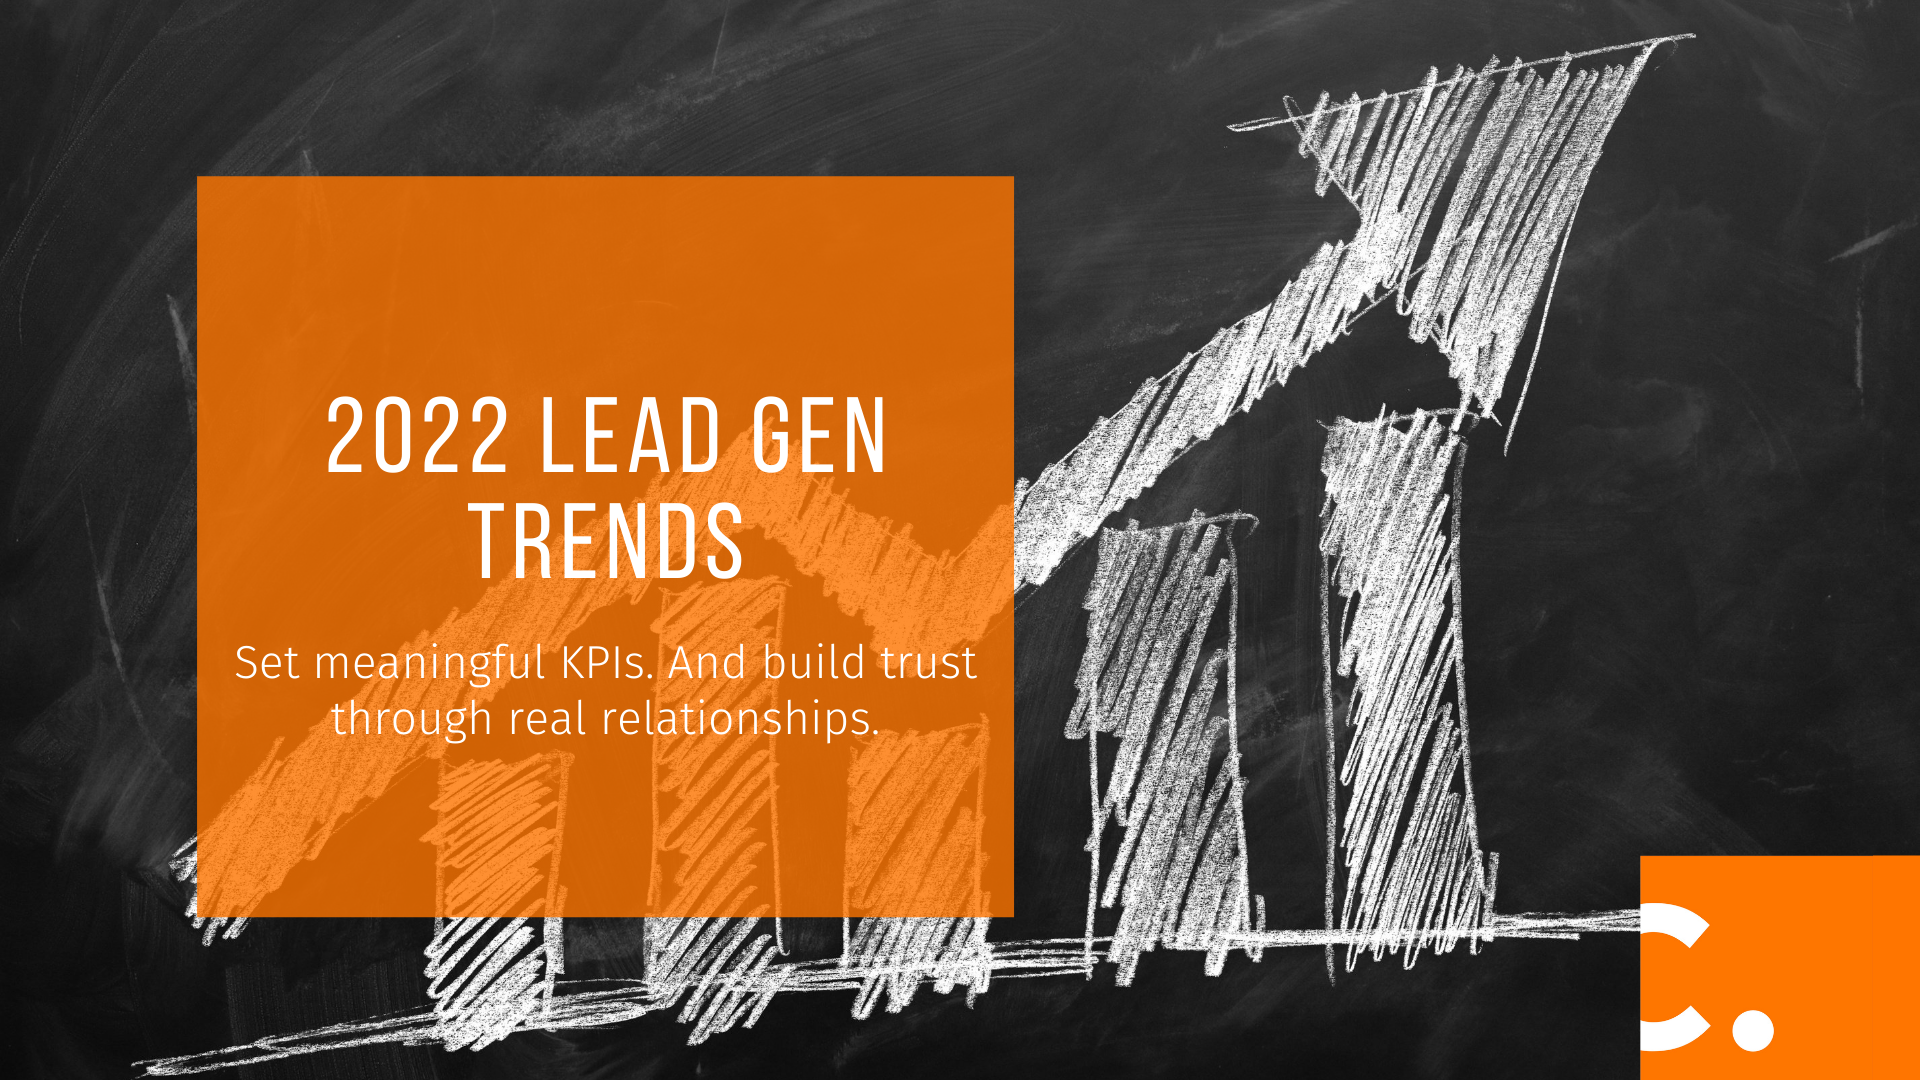 Our latest blog covers some lead generation trends to focus on in 2022!